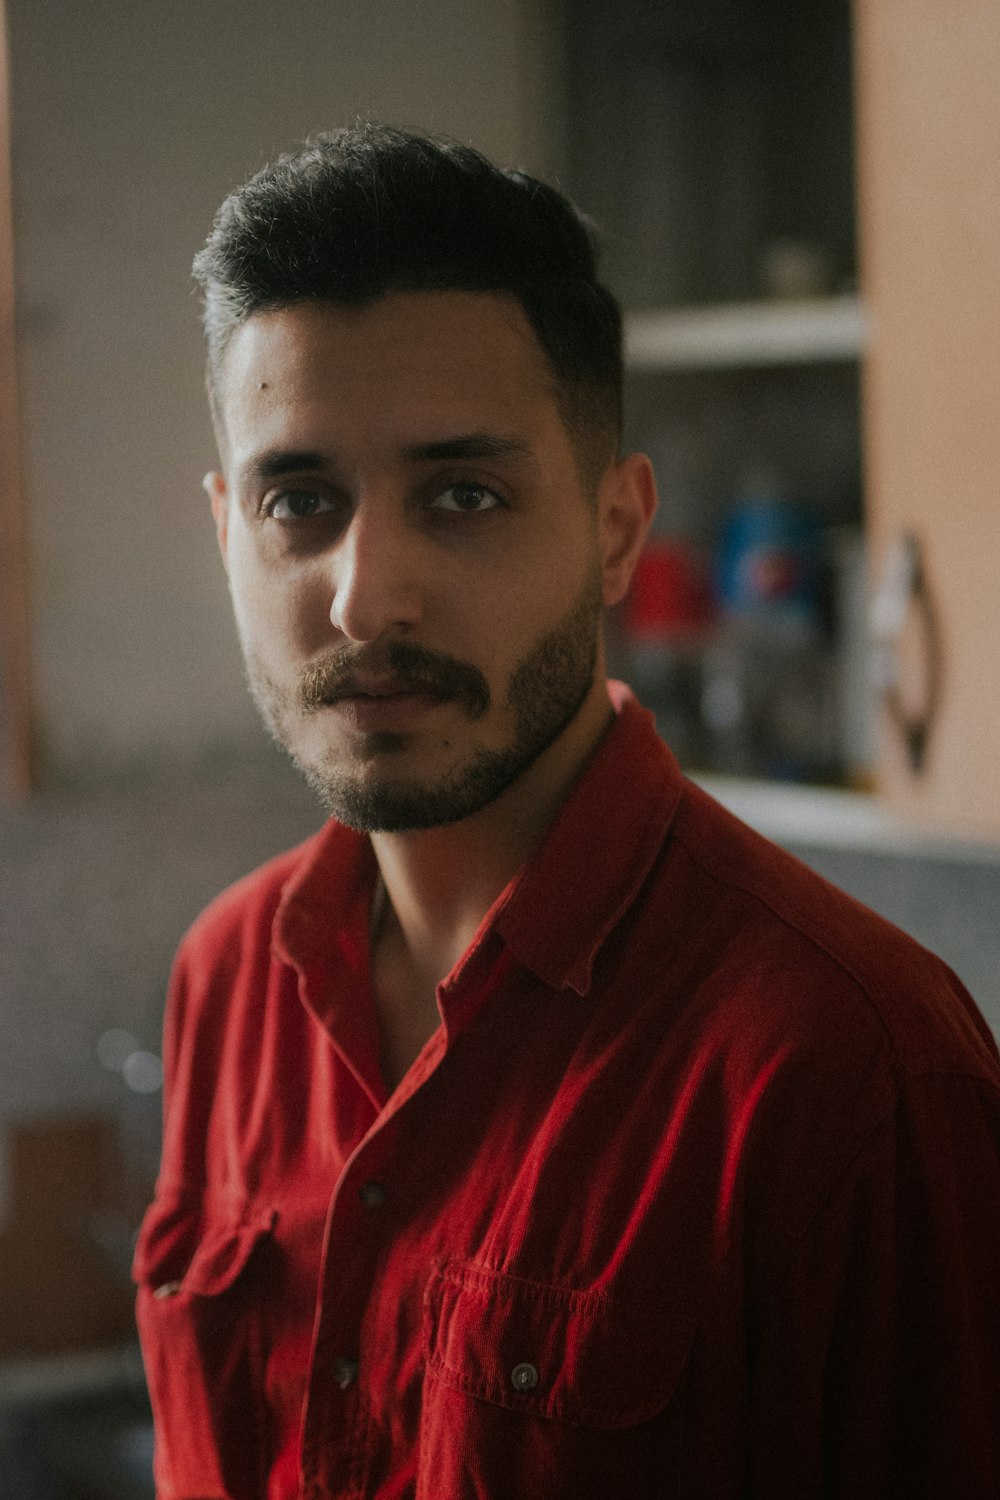 a man in a red shirt standing in a kitchen